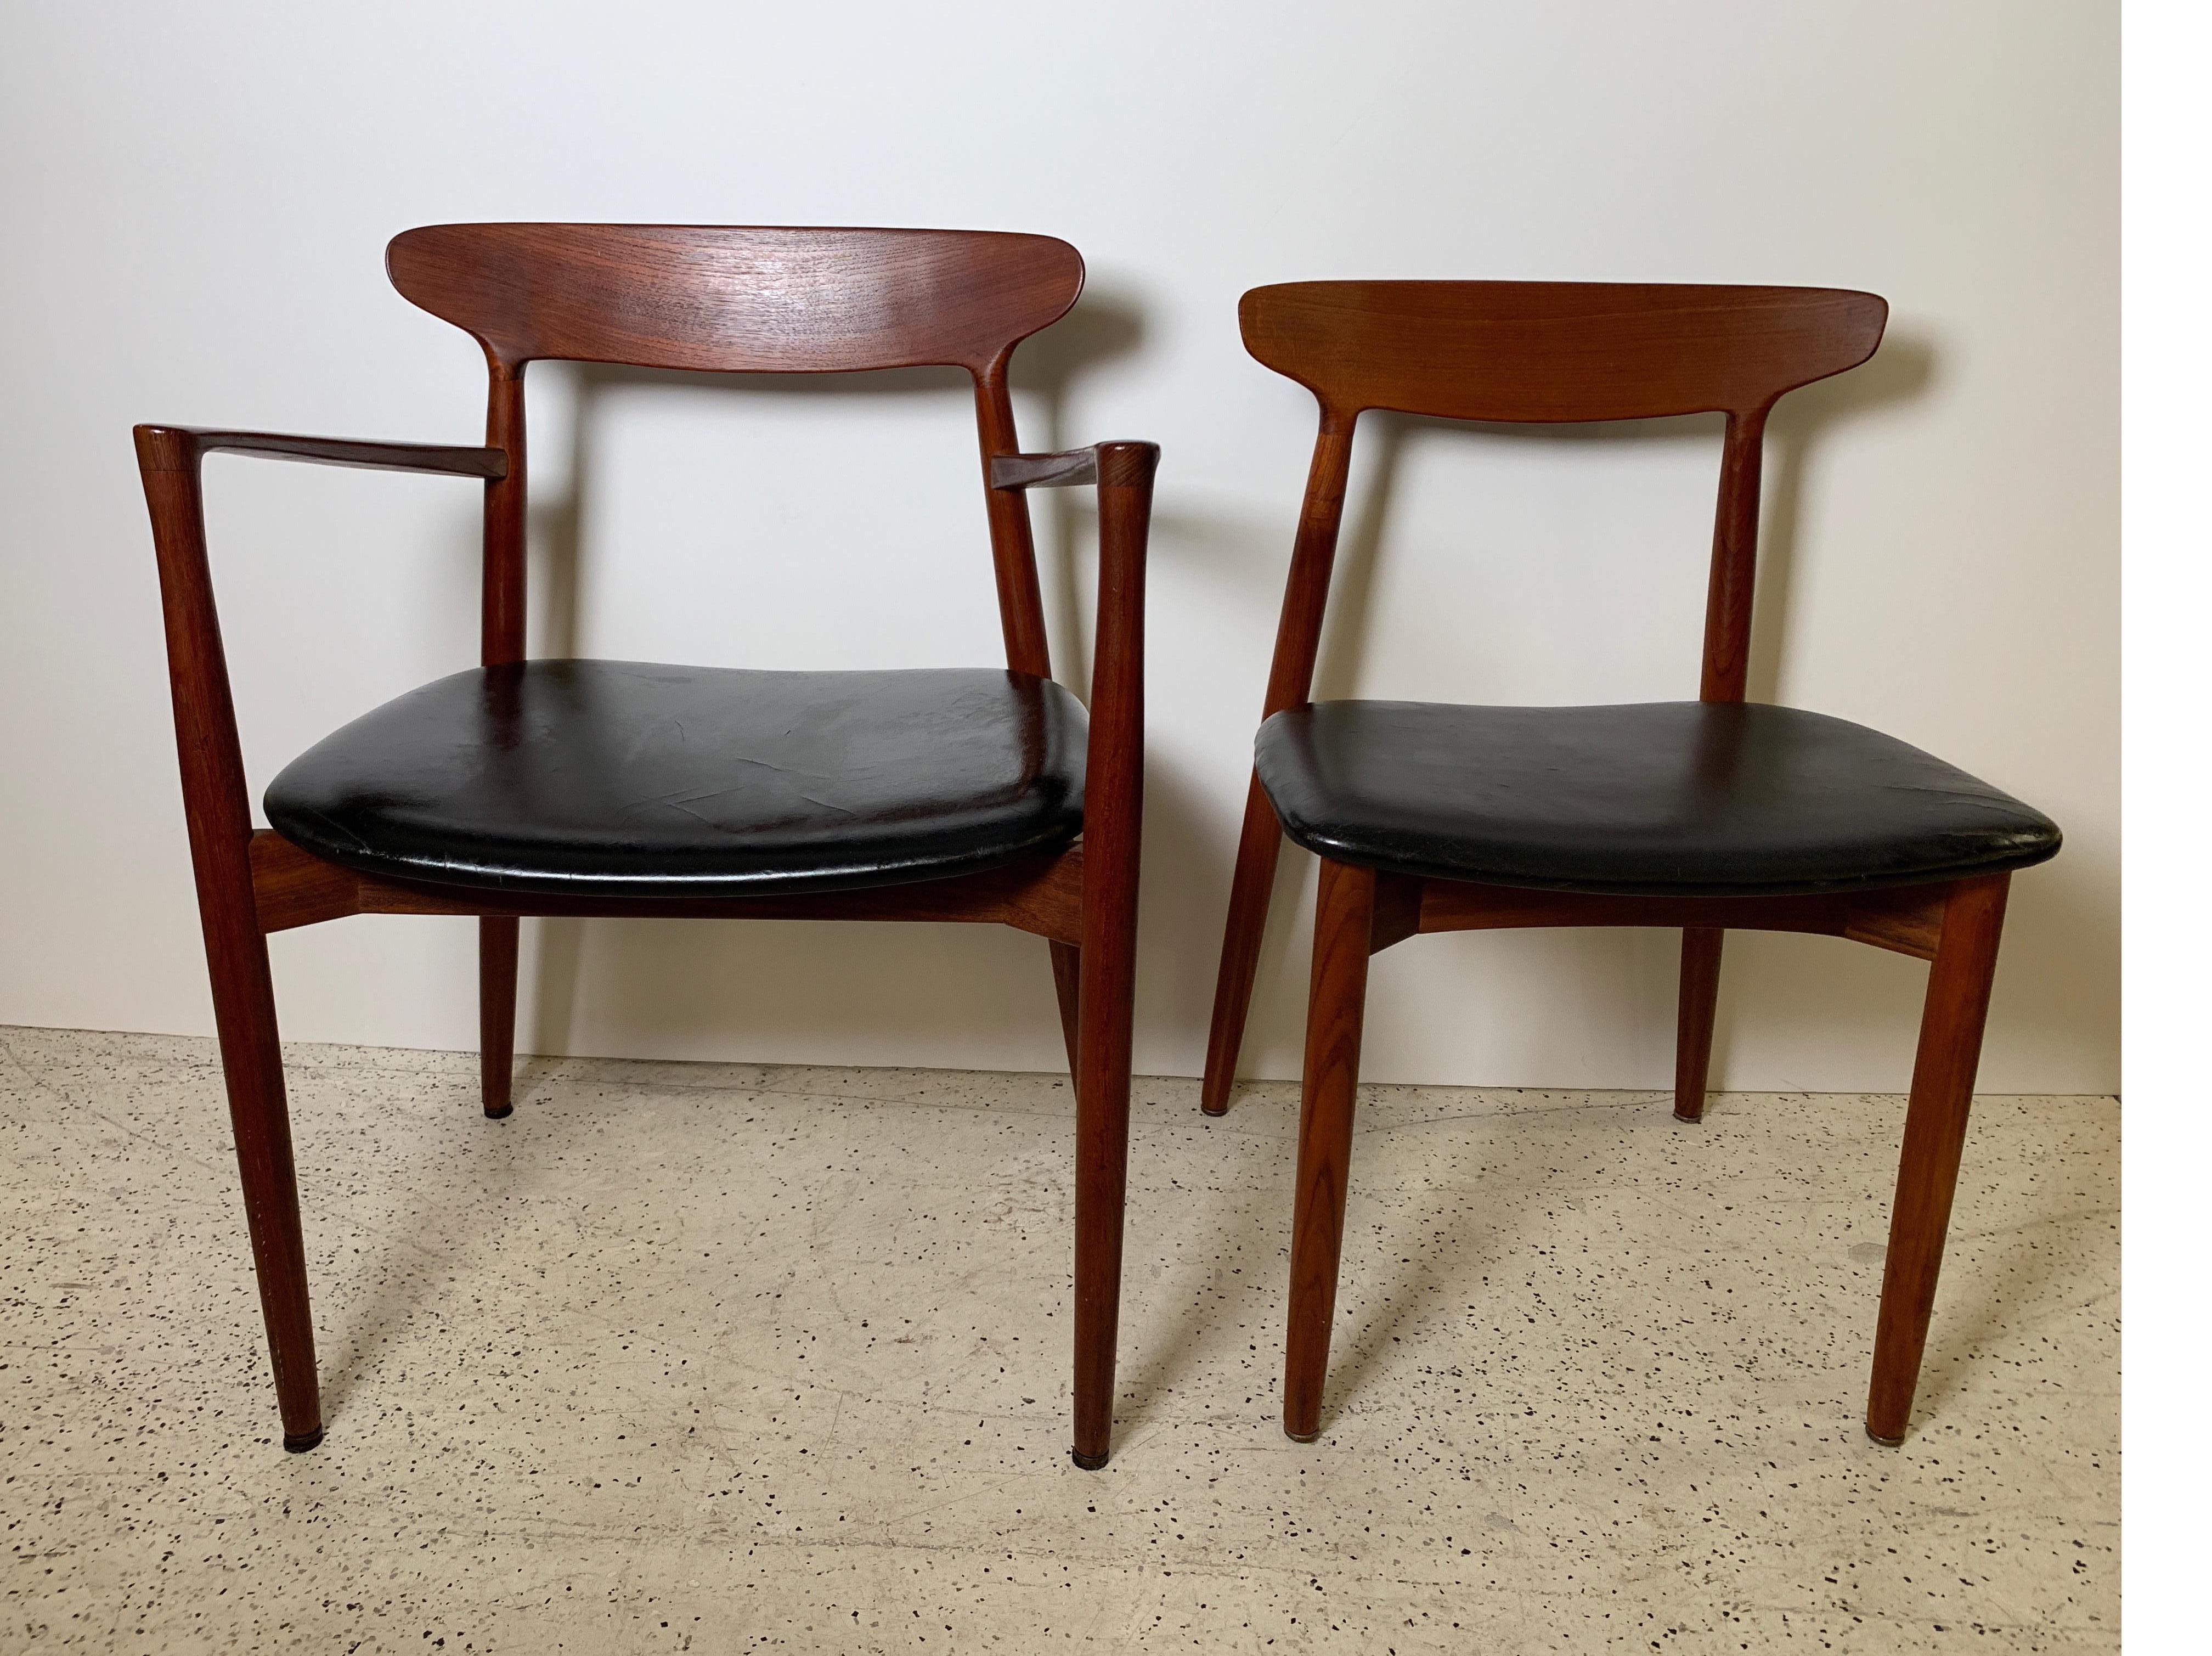 Danish Harry Østergaard Set of Eight Teak and Leather Dining Chairs, Denmark, 1958